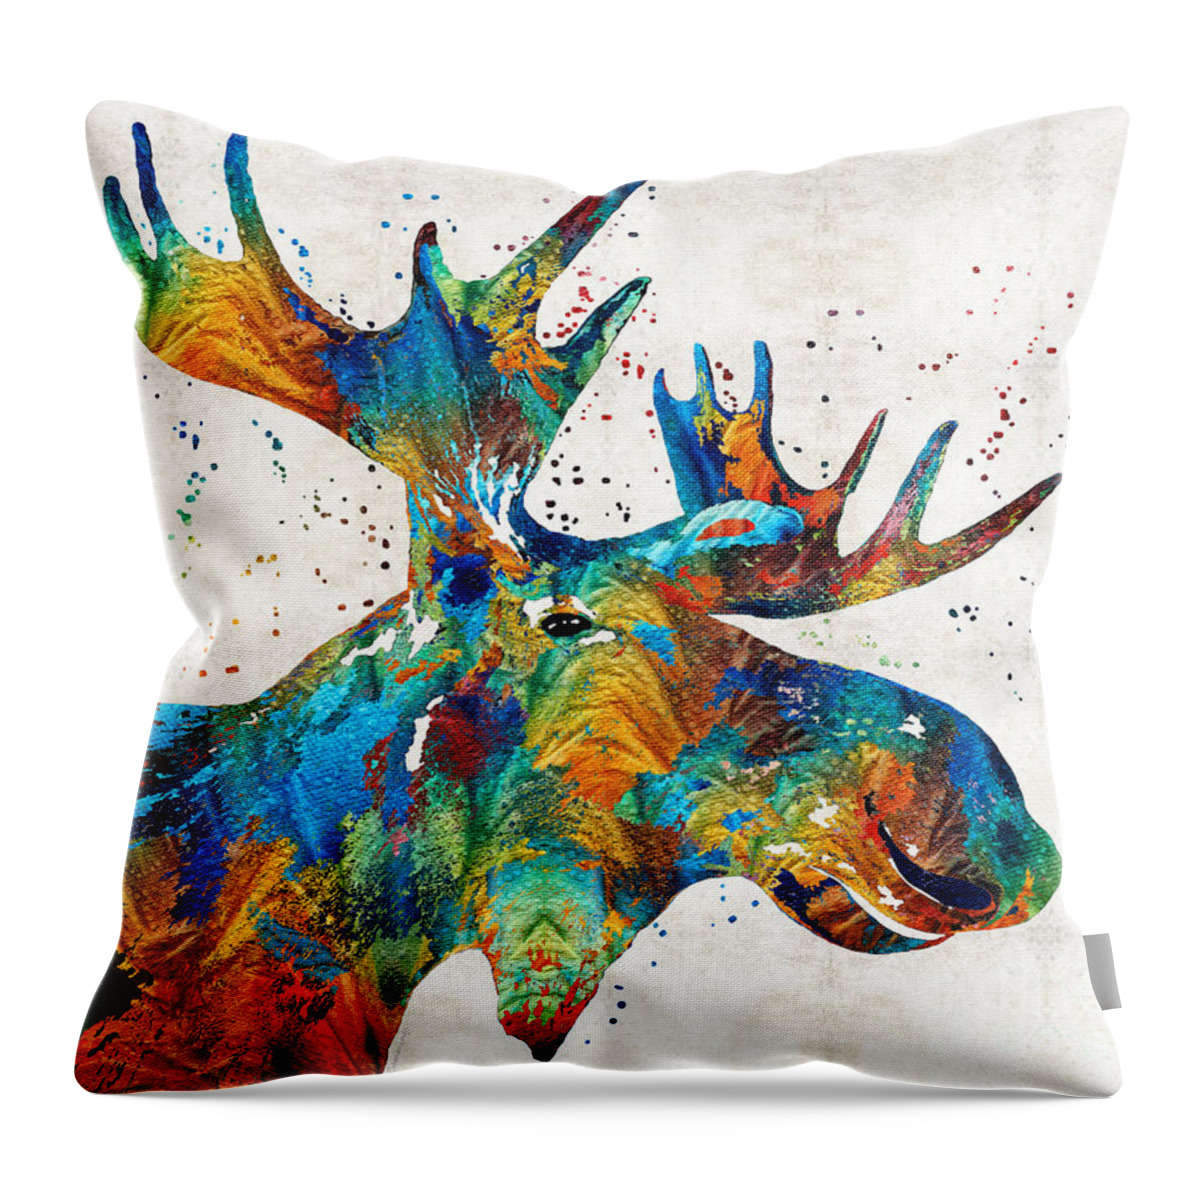 Moose Throw Pillow featuring the painting Colorful Moose Art - Confetti - By Sharon Cummings by Sharon Cummings